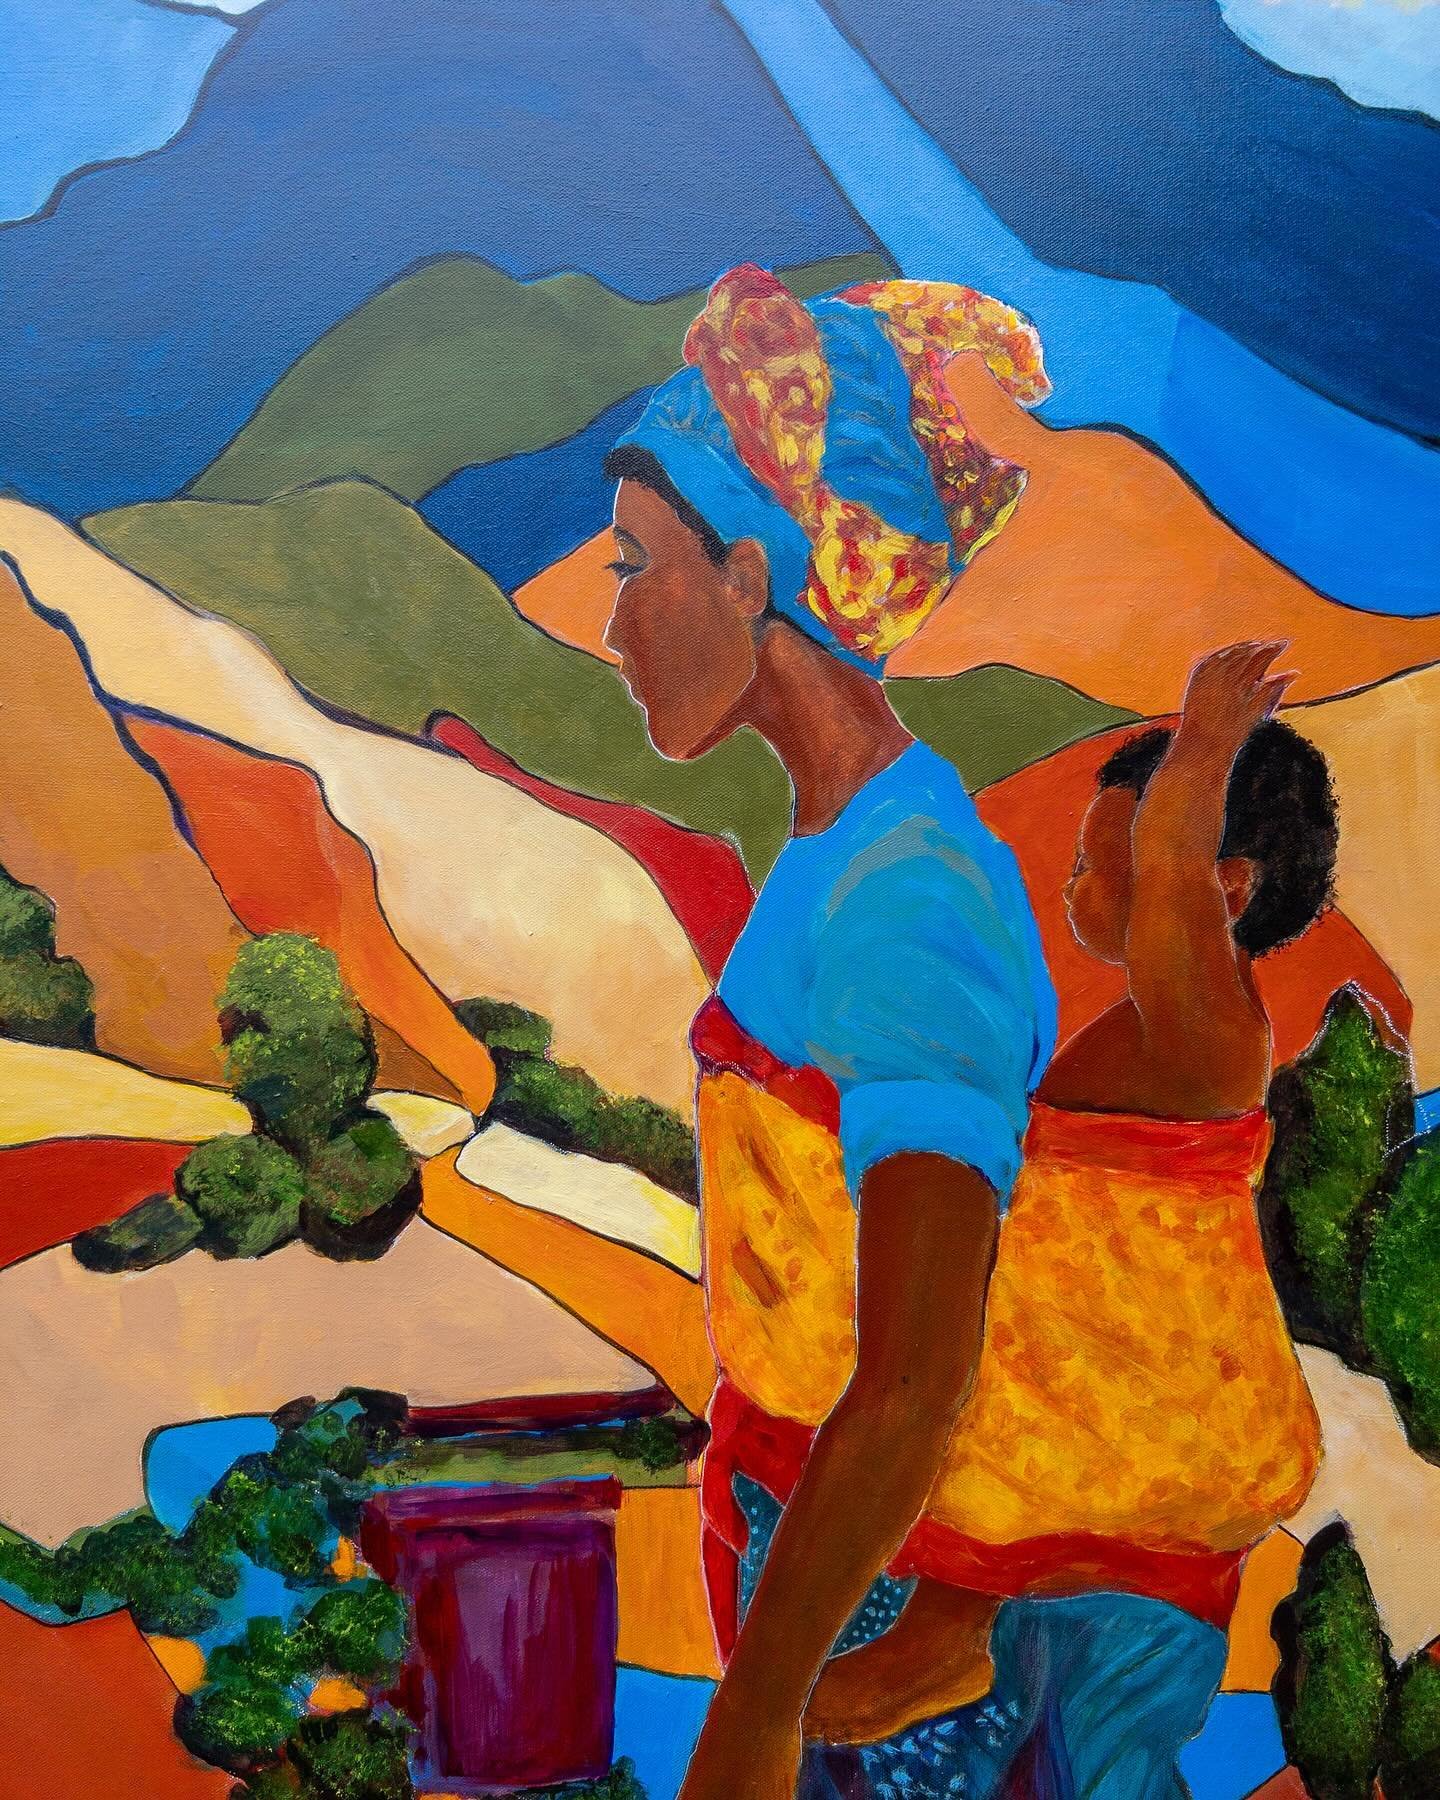 The Journey 

Artist: Teri Madison

24x48

Bold colors inspired by the vibrant culture, people and landscape of Sierra Leone, this painting took me on quite the journey. I love where the journey ended. 

Original painting is available for purchase. D